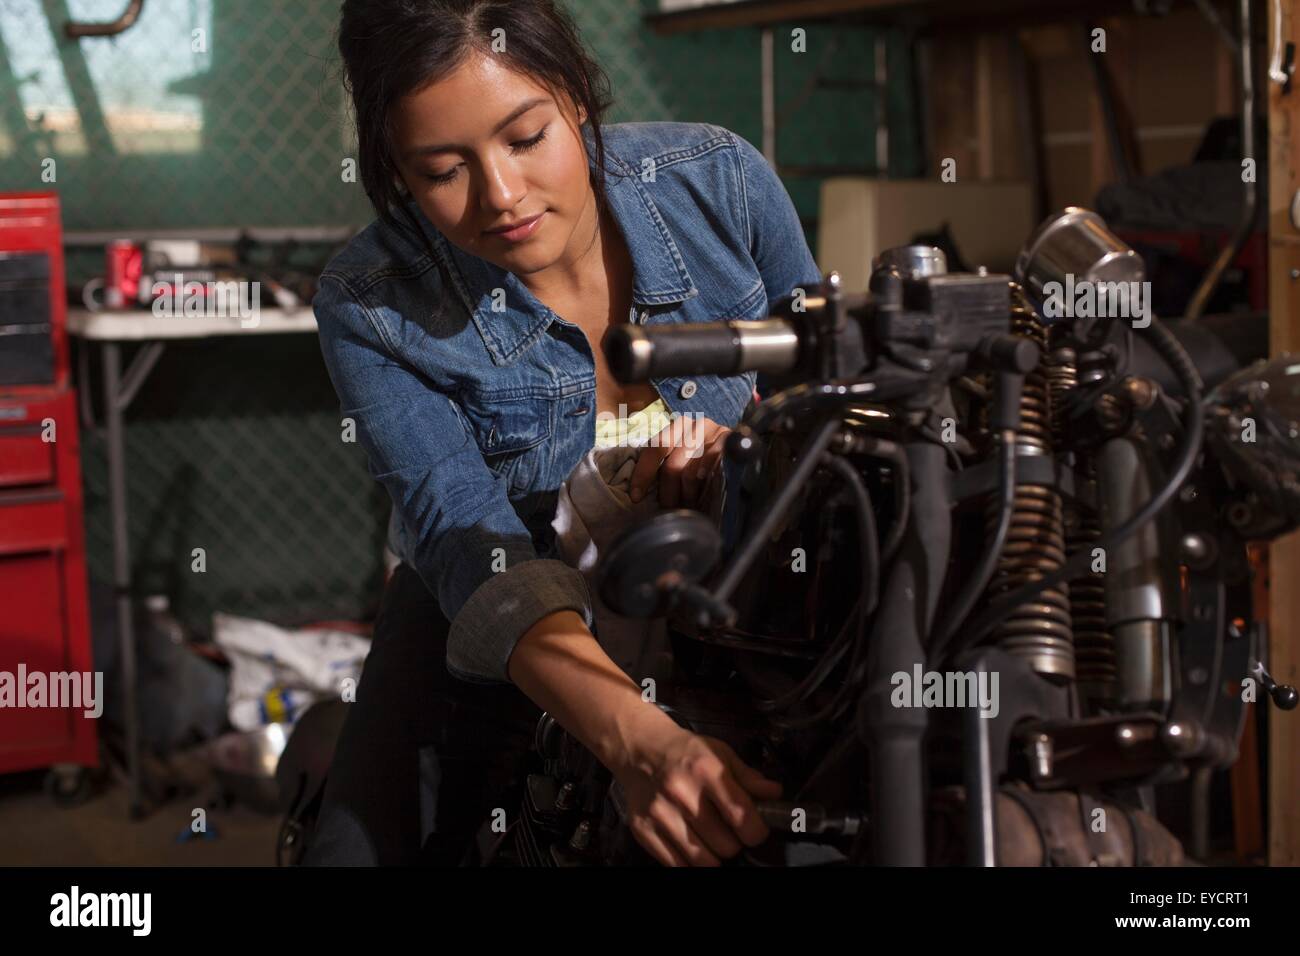 Female mechanic working on motorcycle in workshop Stock Photo